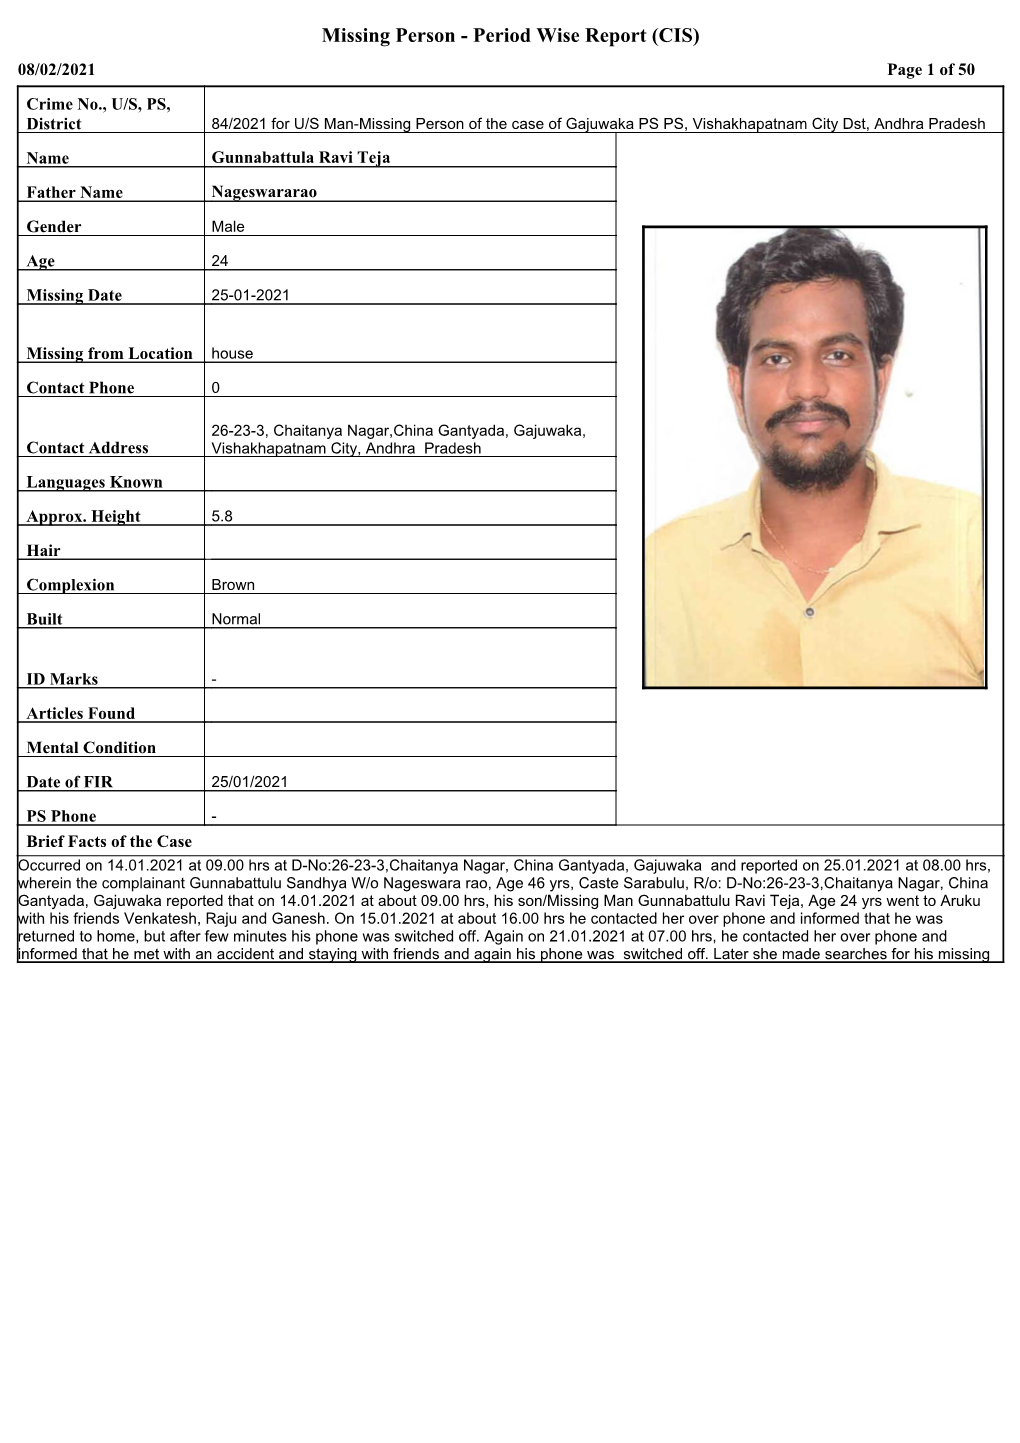 Missing Person - Period Wise Report (CIS) 08/02/2021 Page 1 of 50